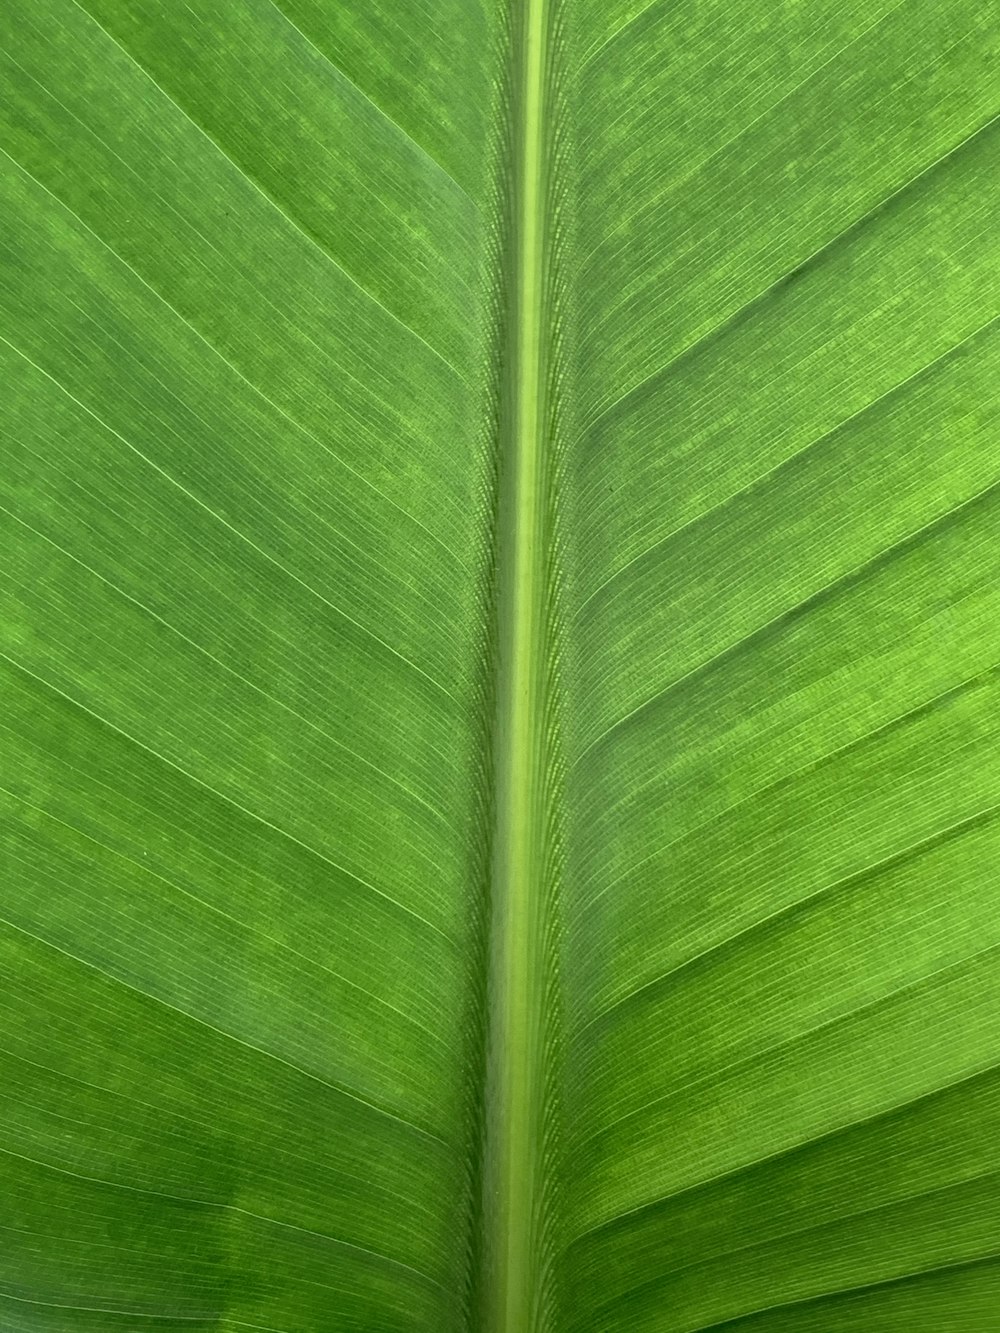 green leaf in close up photography